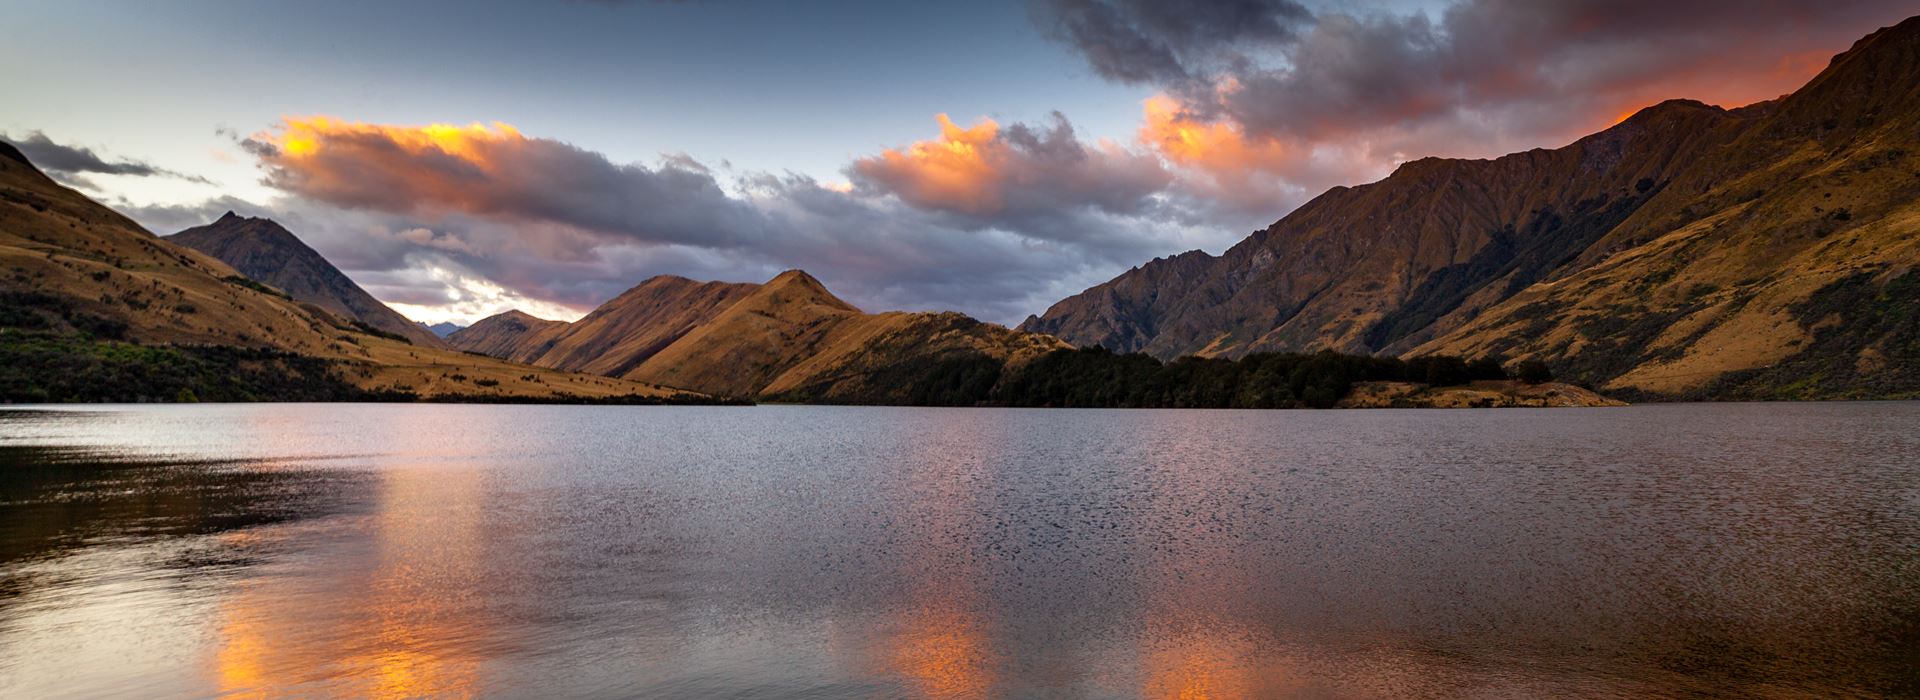 New Zealand Landscape - We need to preserve our lands